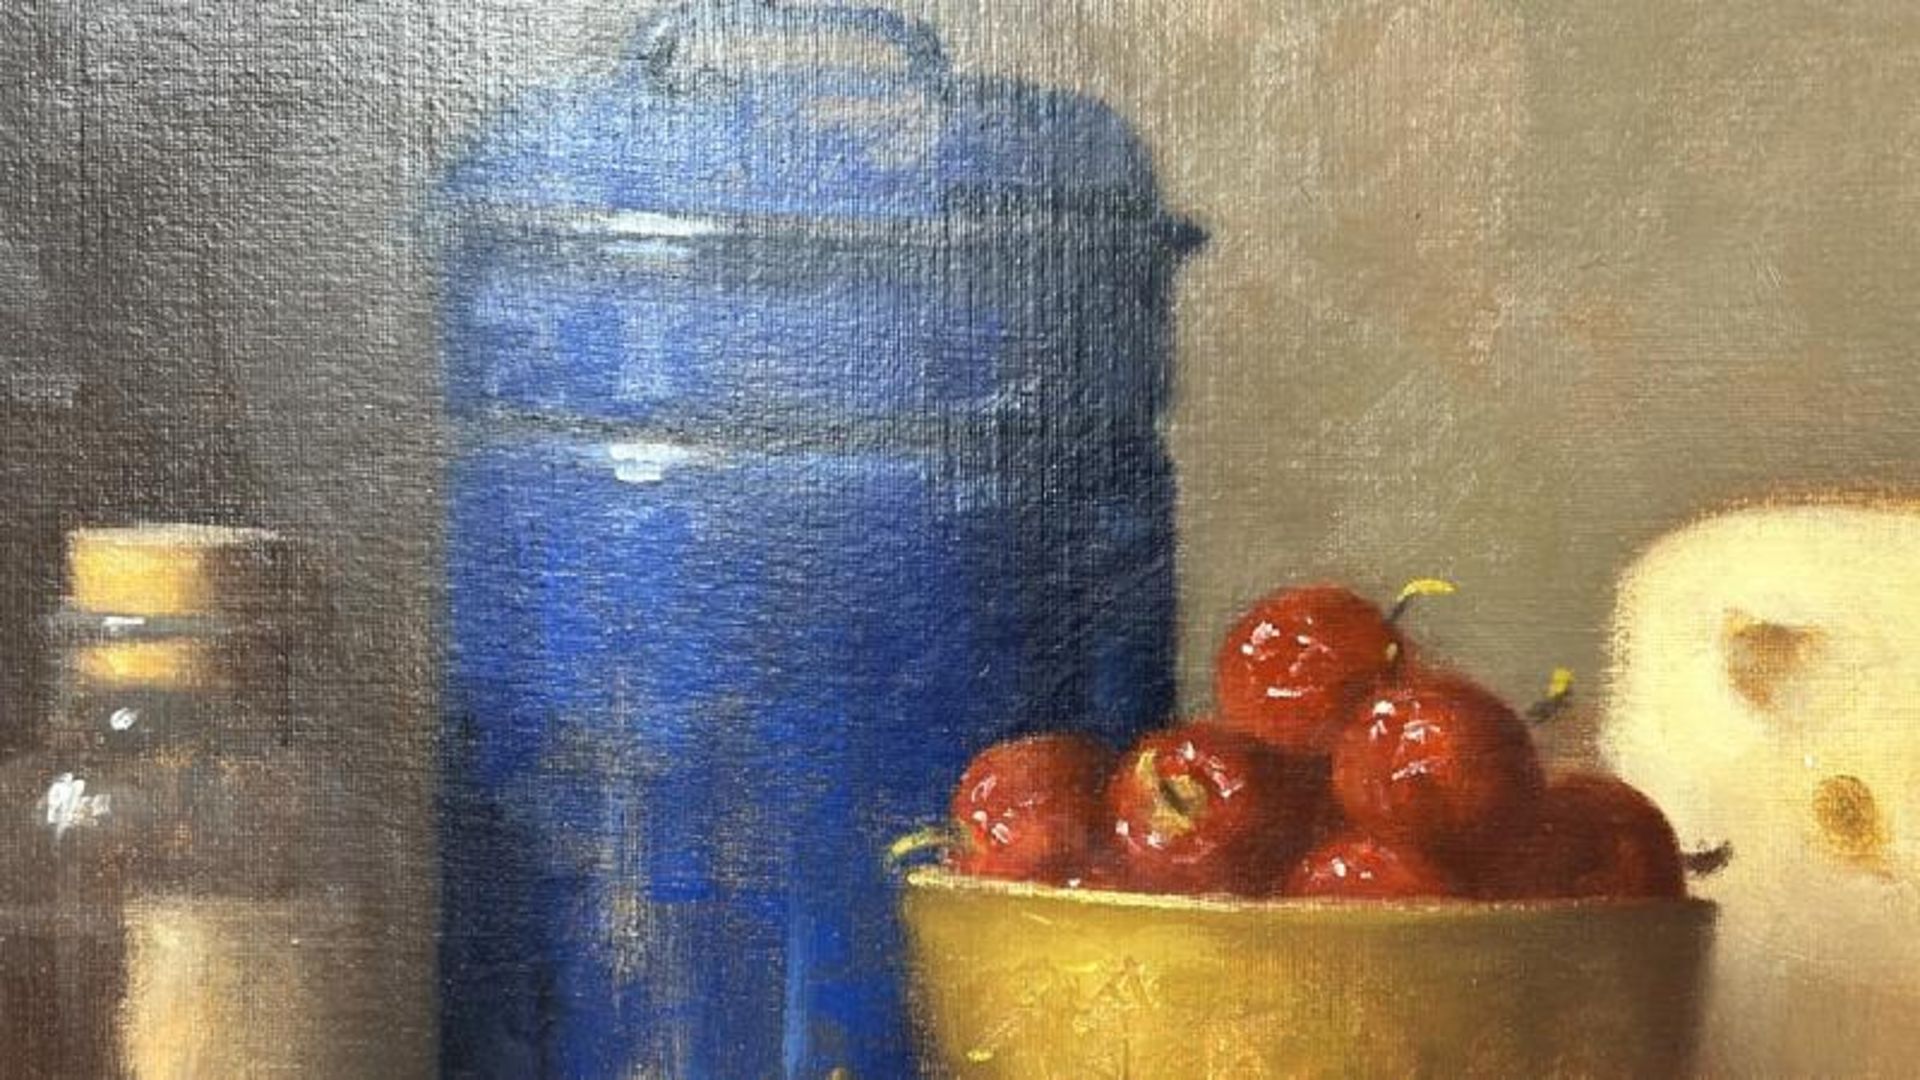 Still life oil on canvas, "Cheese & Cherry's" indistictly signed in red, top right corner, 58 x 48cm - Image 2 of 5